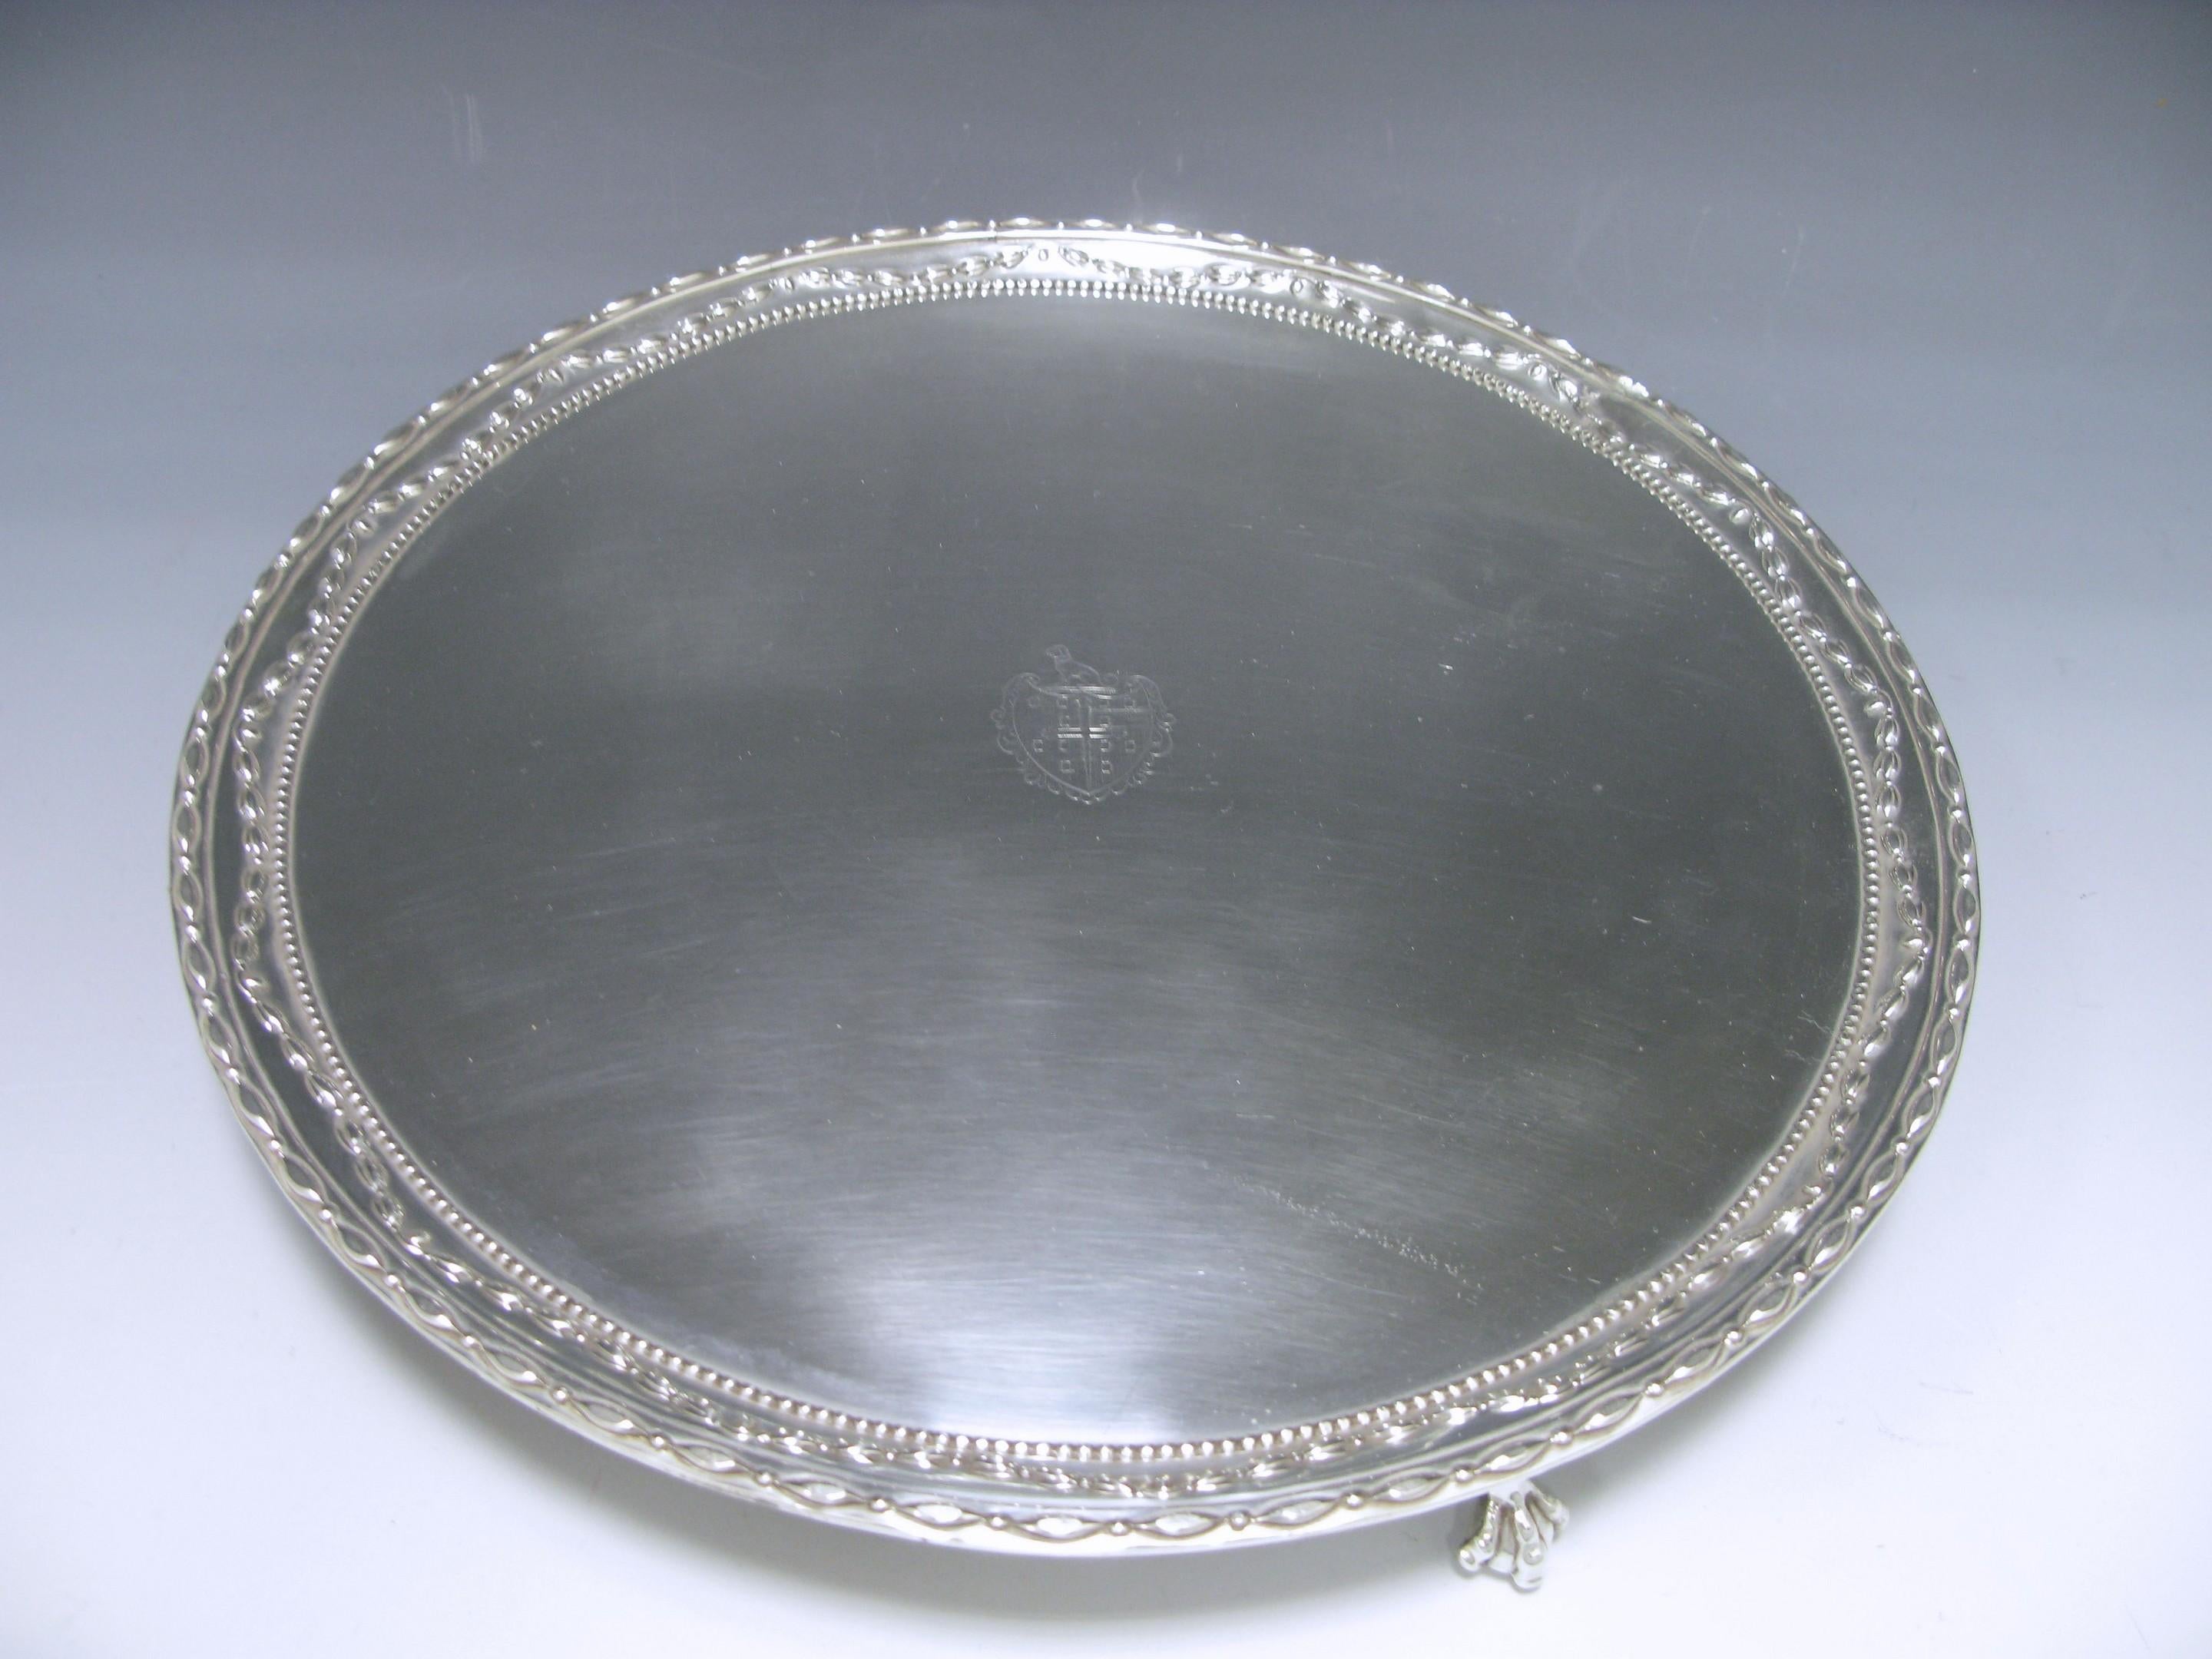 A George III antique silver salver of circular form, with swag and bead border , the salver stands on three claw and ball feet. The centre is engraved with an armorial of “The arms are those for Norris of Guist and Wood Norton, Norfolk.” 
Diameter